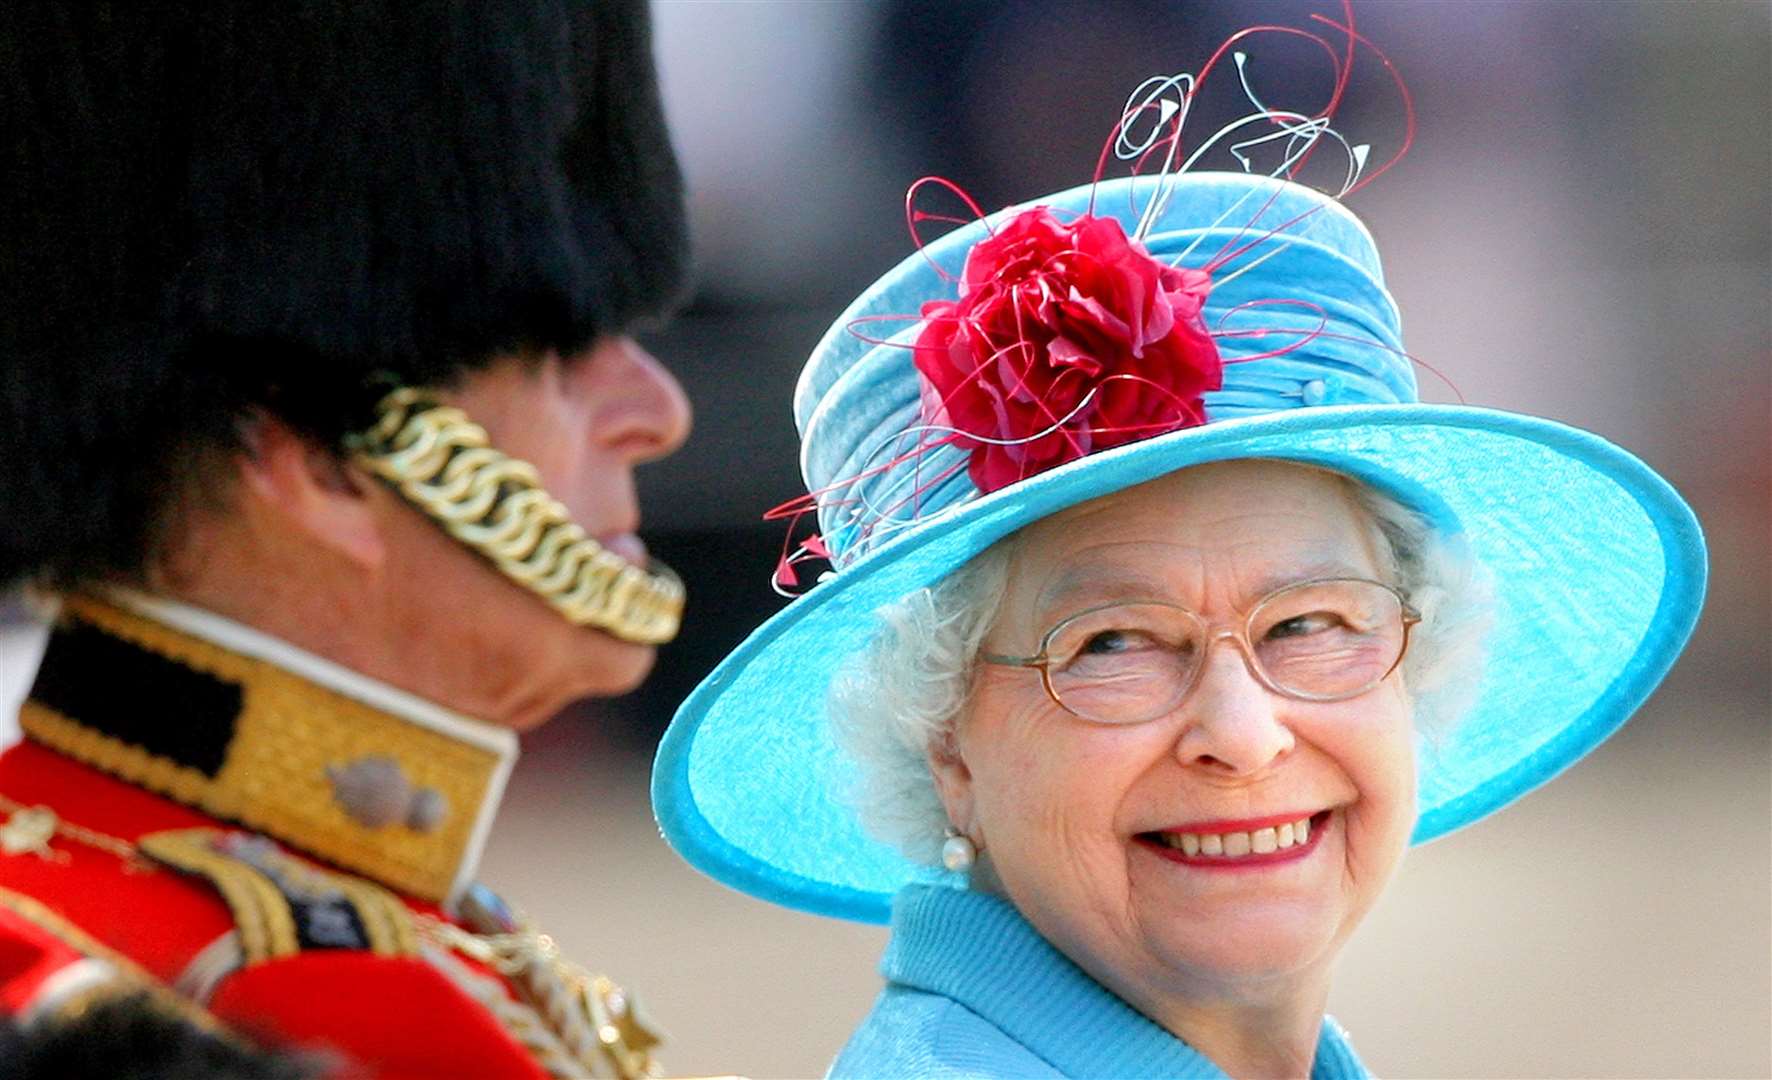 The Queen with Philip at a Trooping the Colour ceremony, which this year will not go ahead in its traditional format (Lewis Whyld/PA)